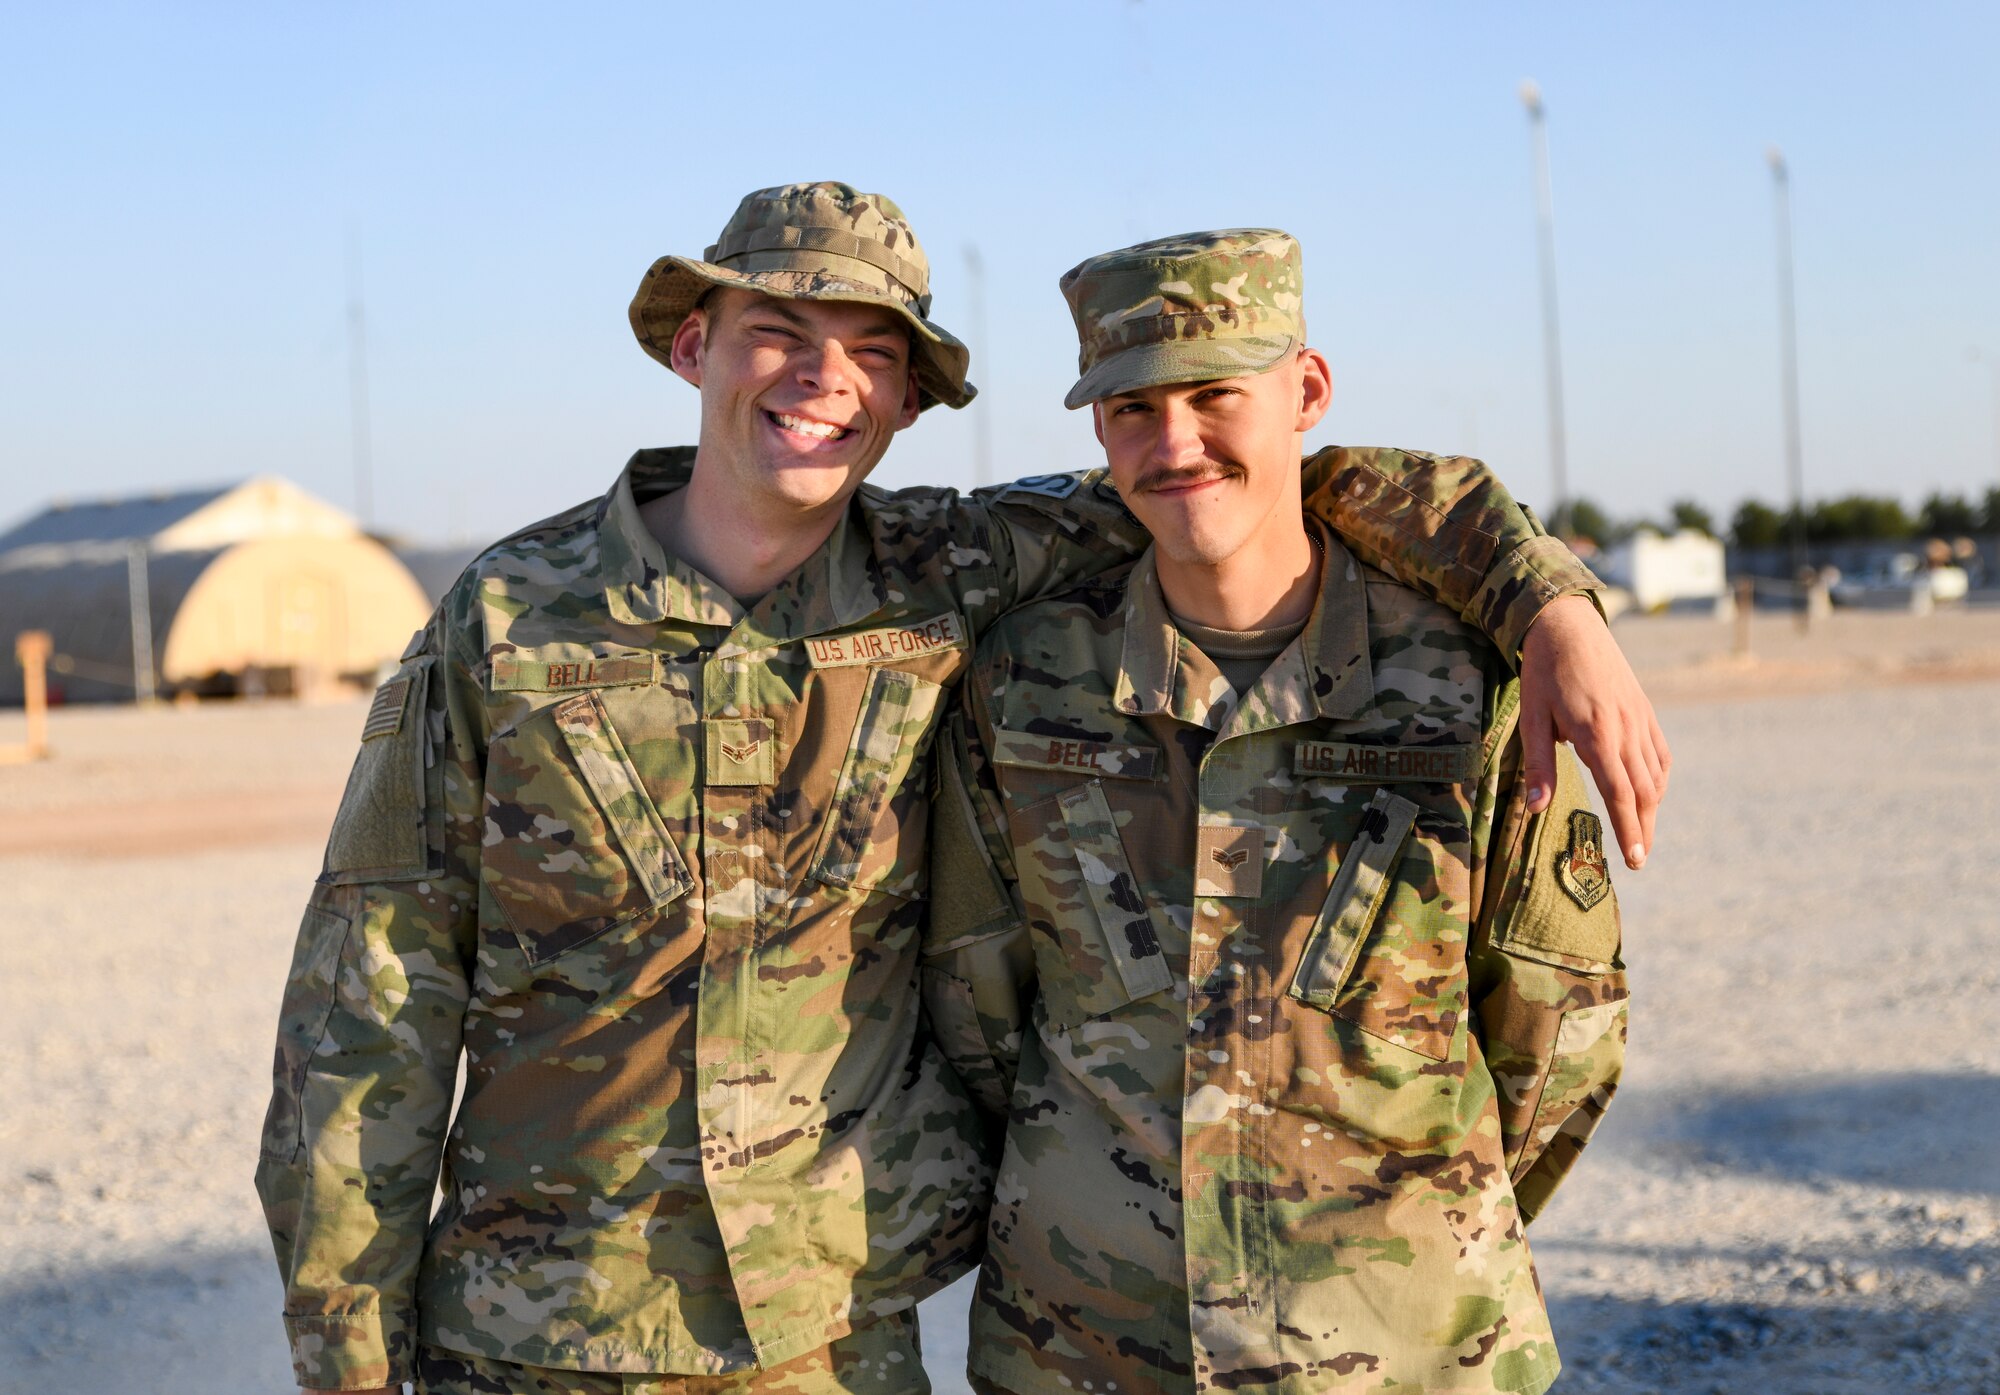 Airman 1st Class Joel Bell, right, 378th Expeditionry Secruity Forces Squadron defender and Senior Airman Jared Bell, left, 378th Expeditionary Logistics Readiness Squadron vehicle maintainer, pose together at Prince Sultan Air Base, Kingdom of Saudi Arabia, Dec. 28, 2019.